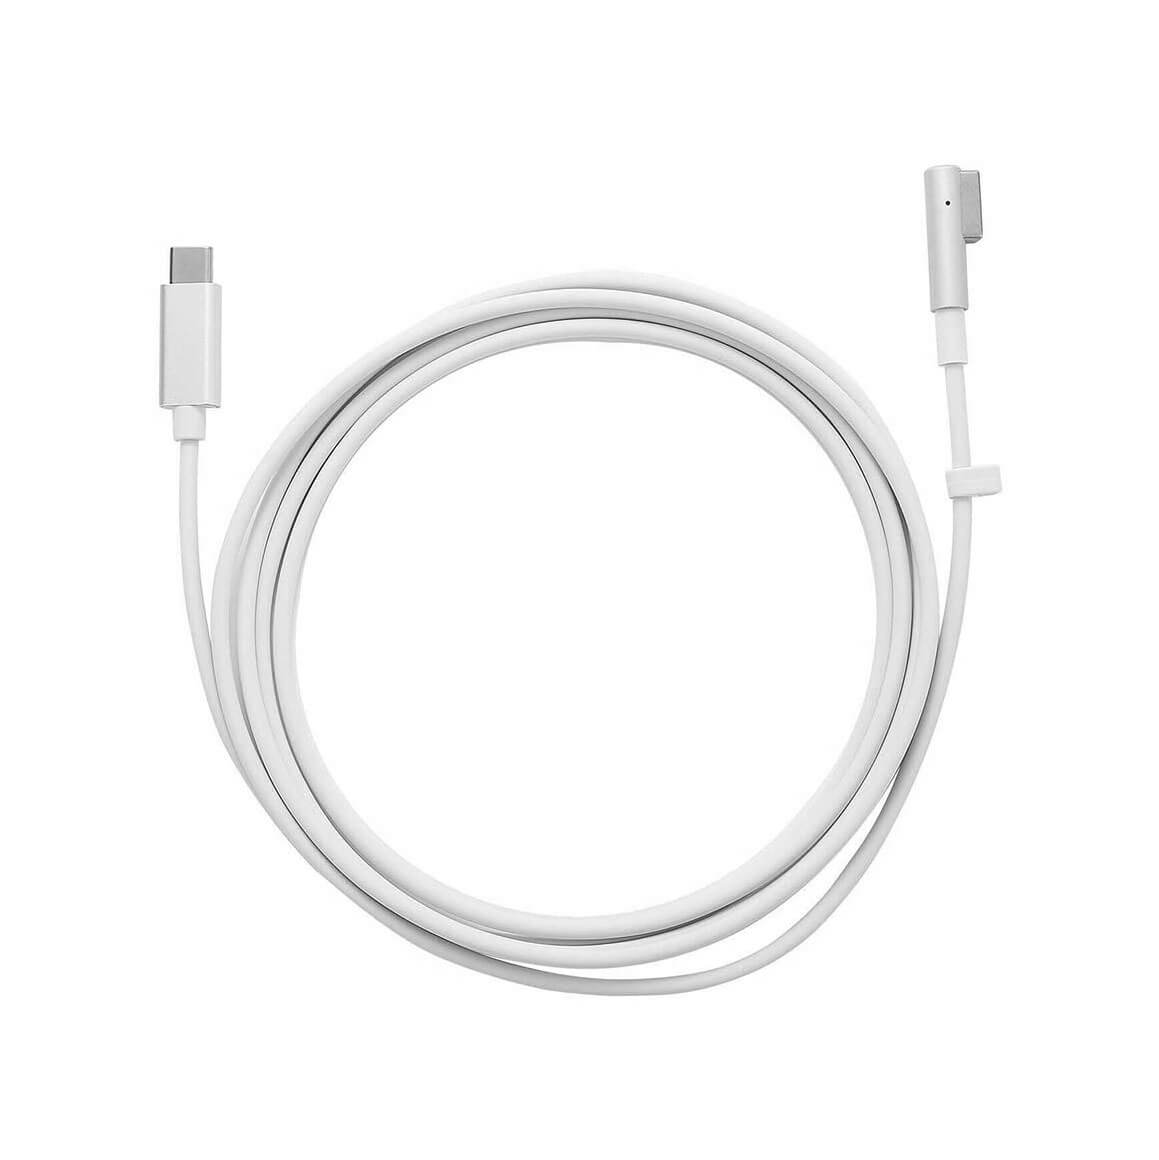 USB-C Type C To Magsafe 1 L-Tip Power Adapter Cable for Macbook Pro / Air